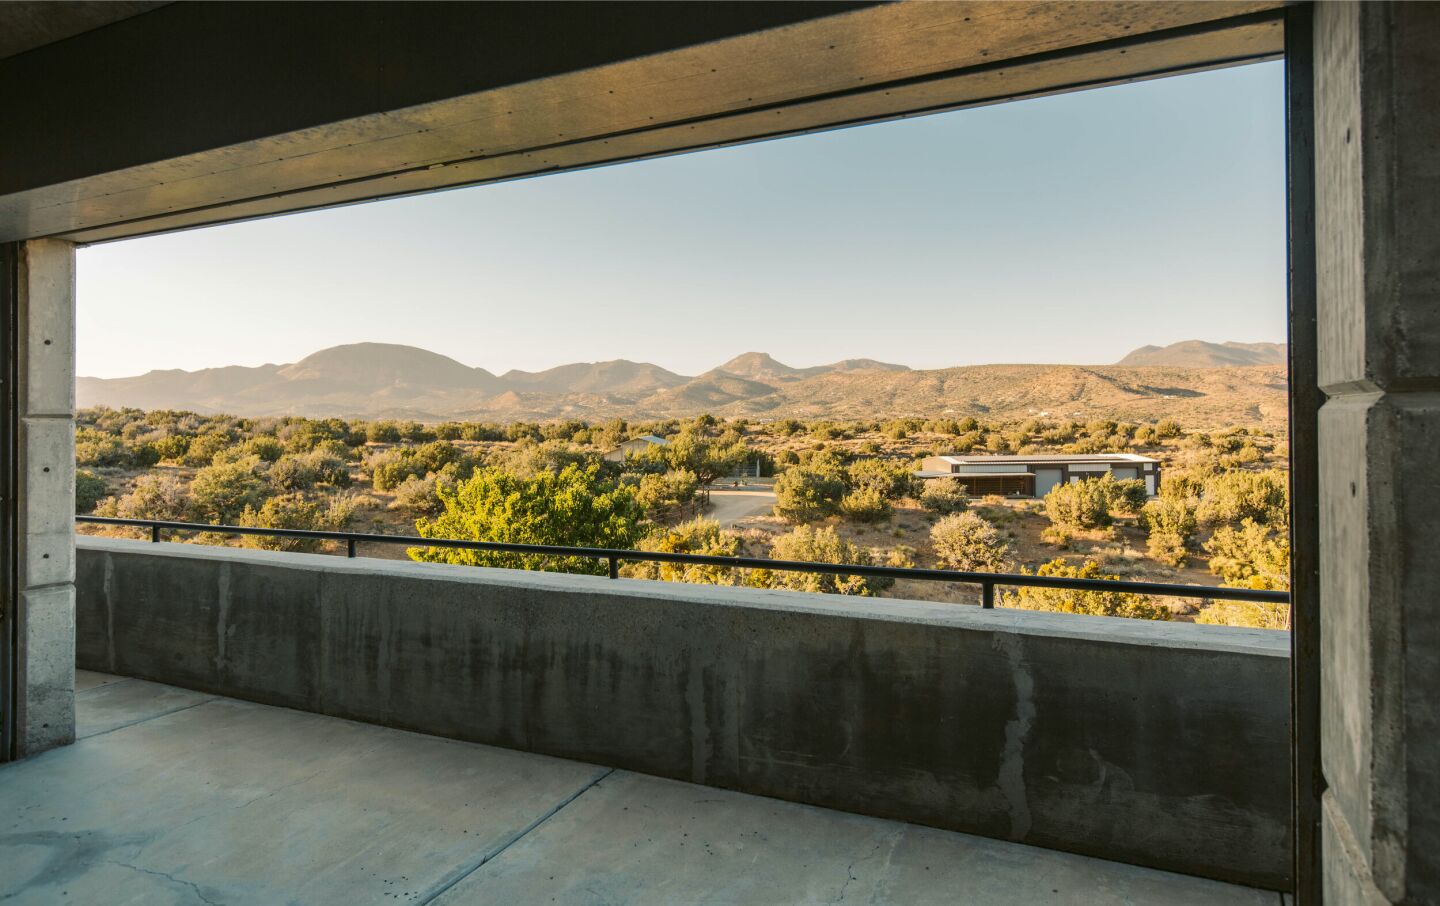 Desert hills and mountains are seen from a concrete balcony.